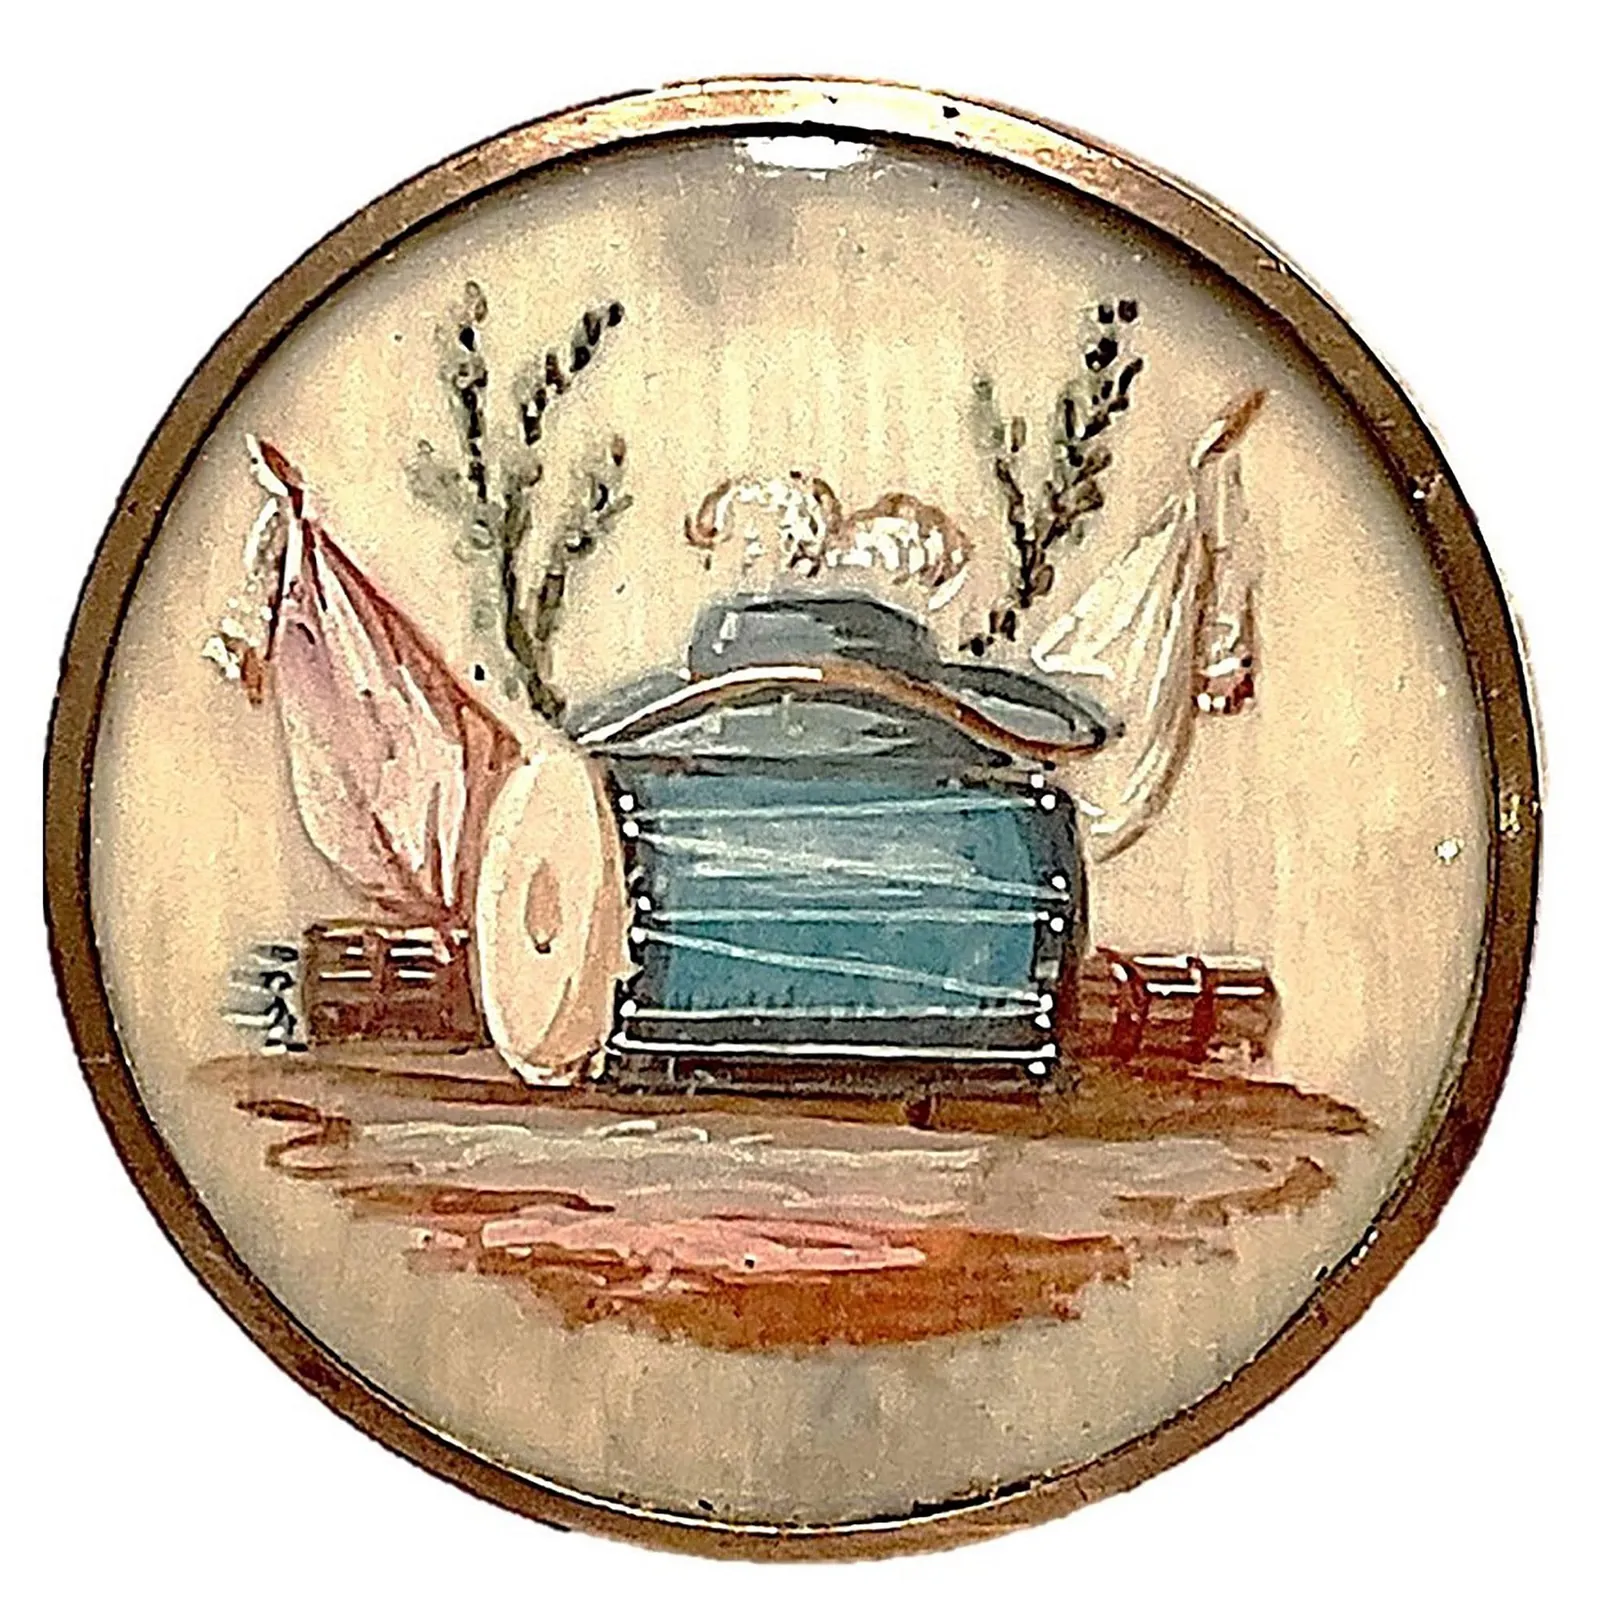 Lot #472, an 18th-century reverse-painted glass button, was estimated at $800 to $1,200 and sold for $5,625. Image courtesy of Lion and Unicorn.
